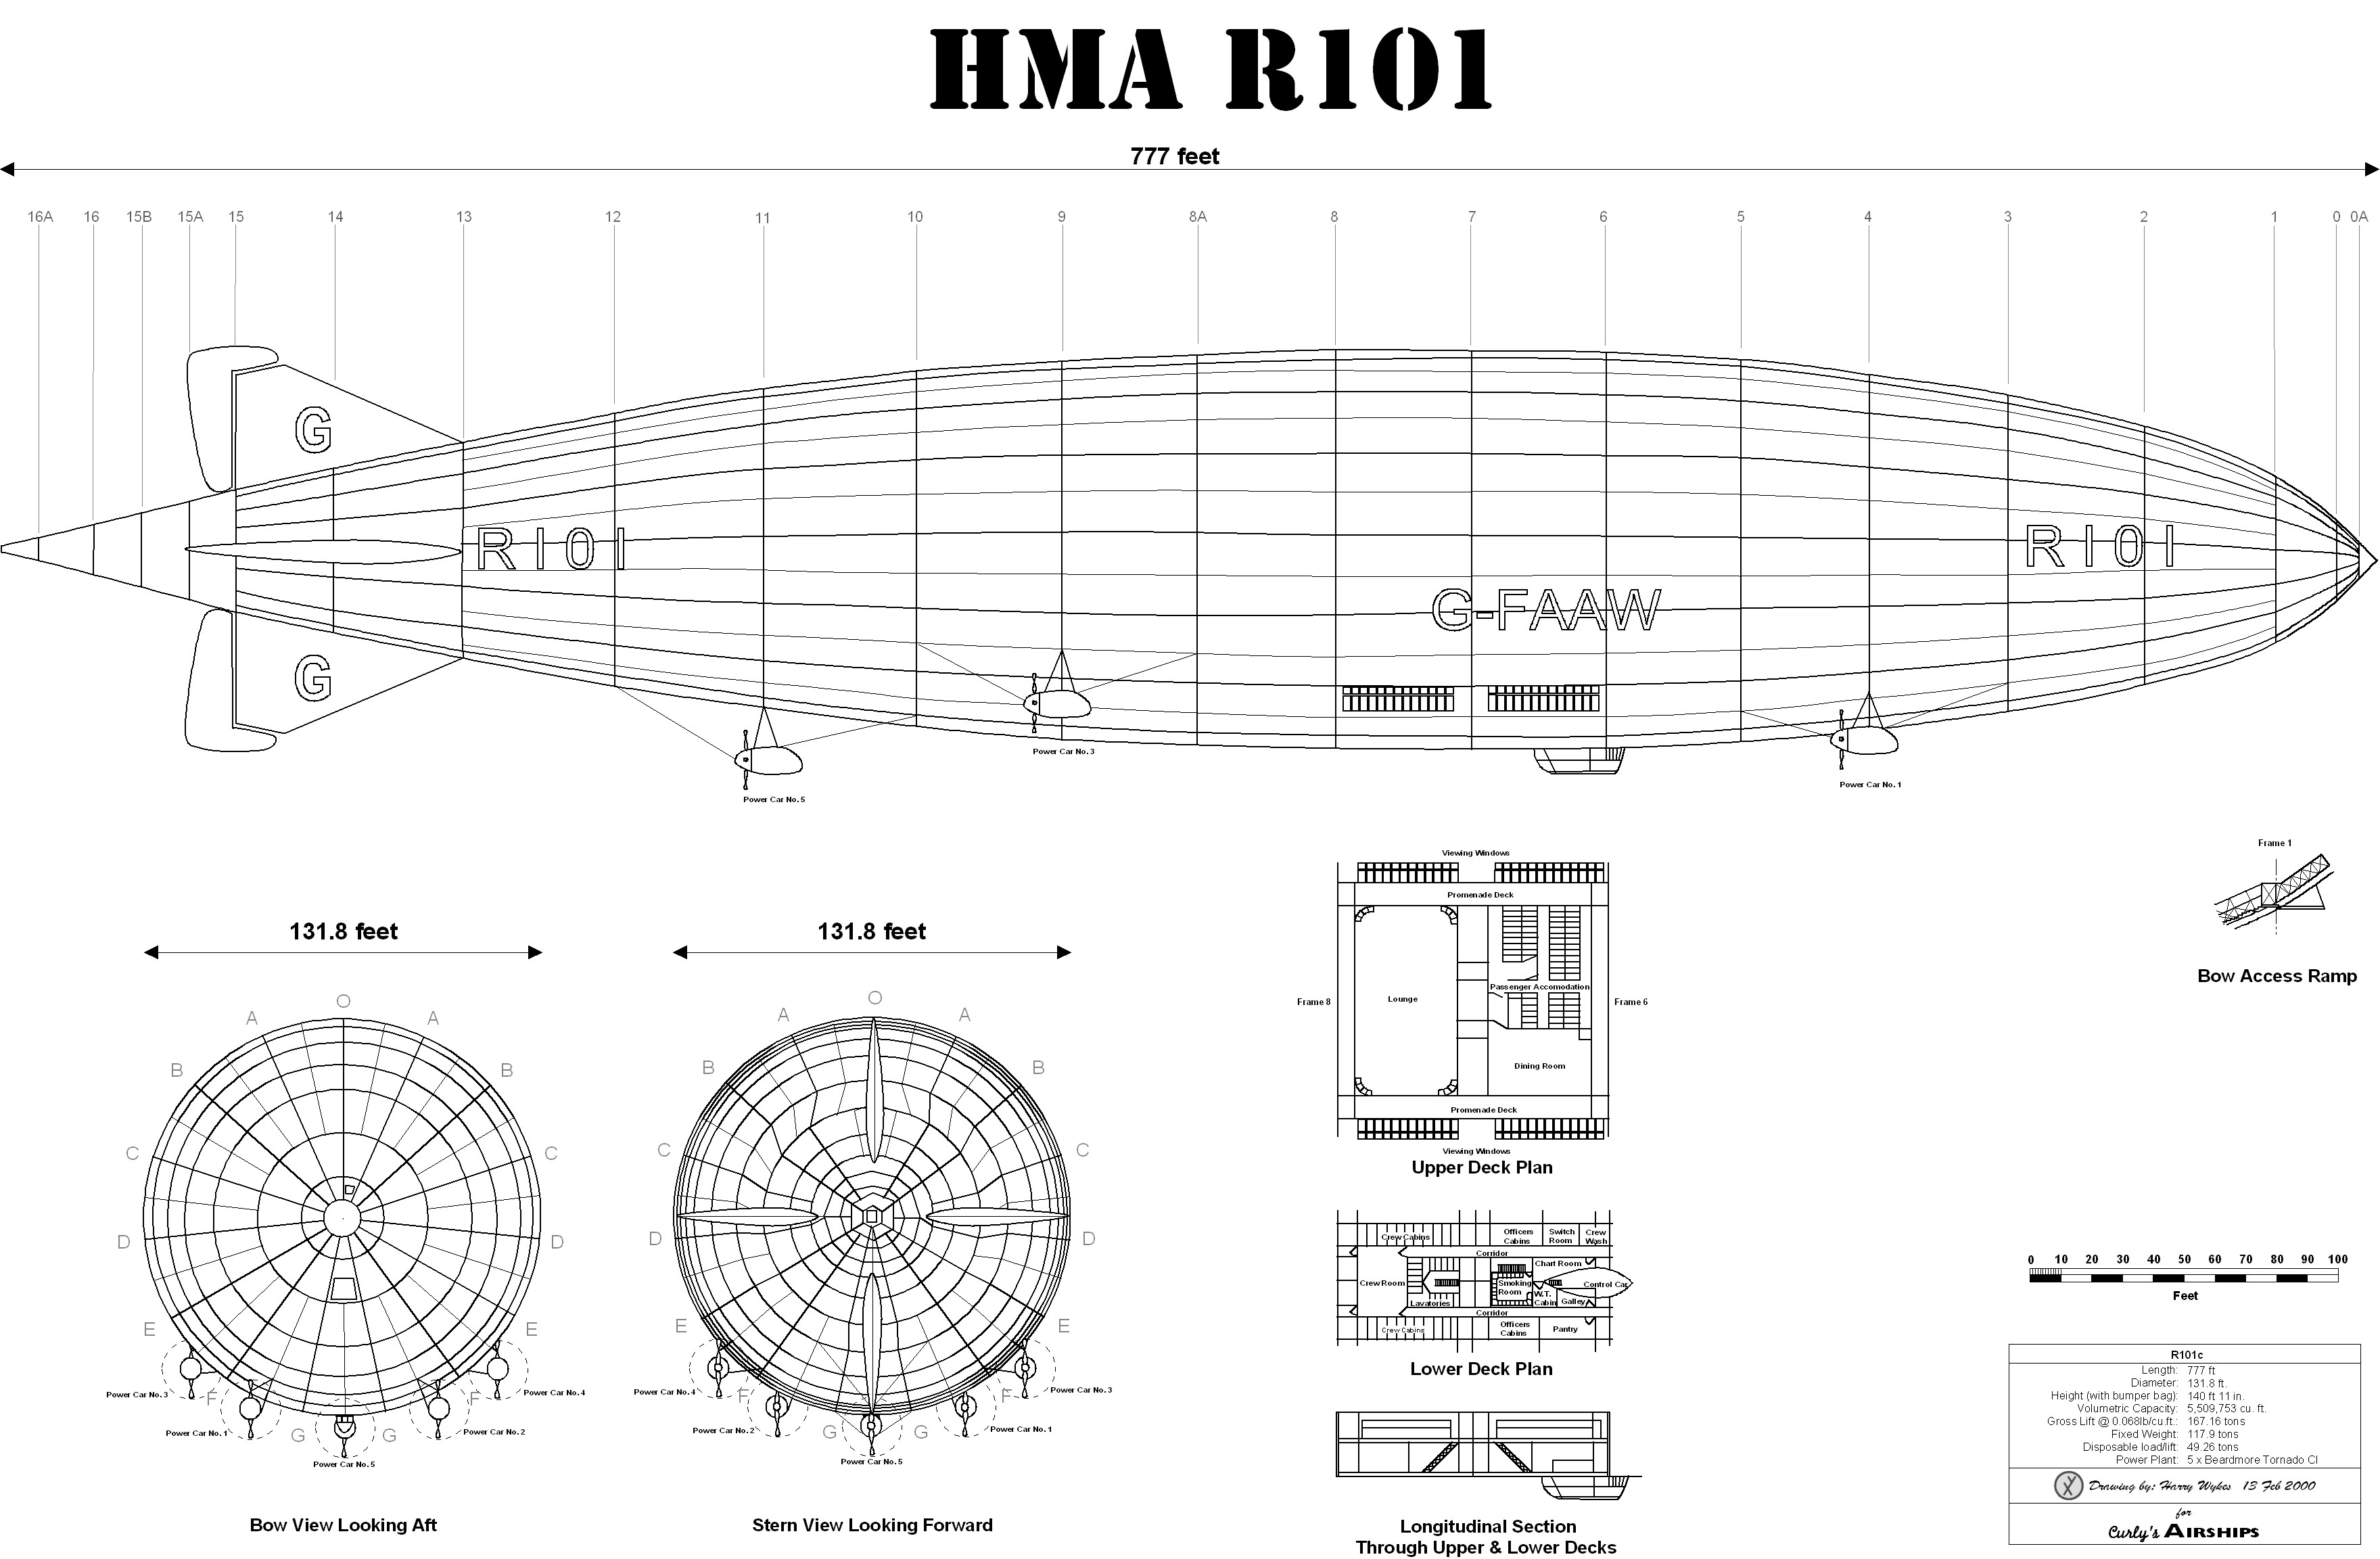 HMA R 101 English State Air Ministry funded & designed airship